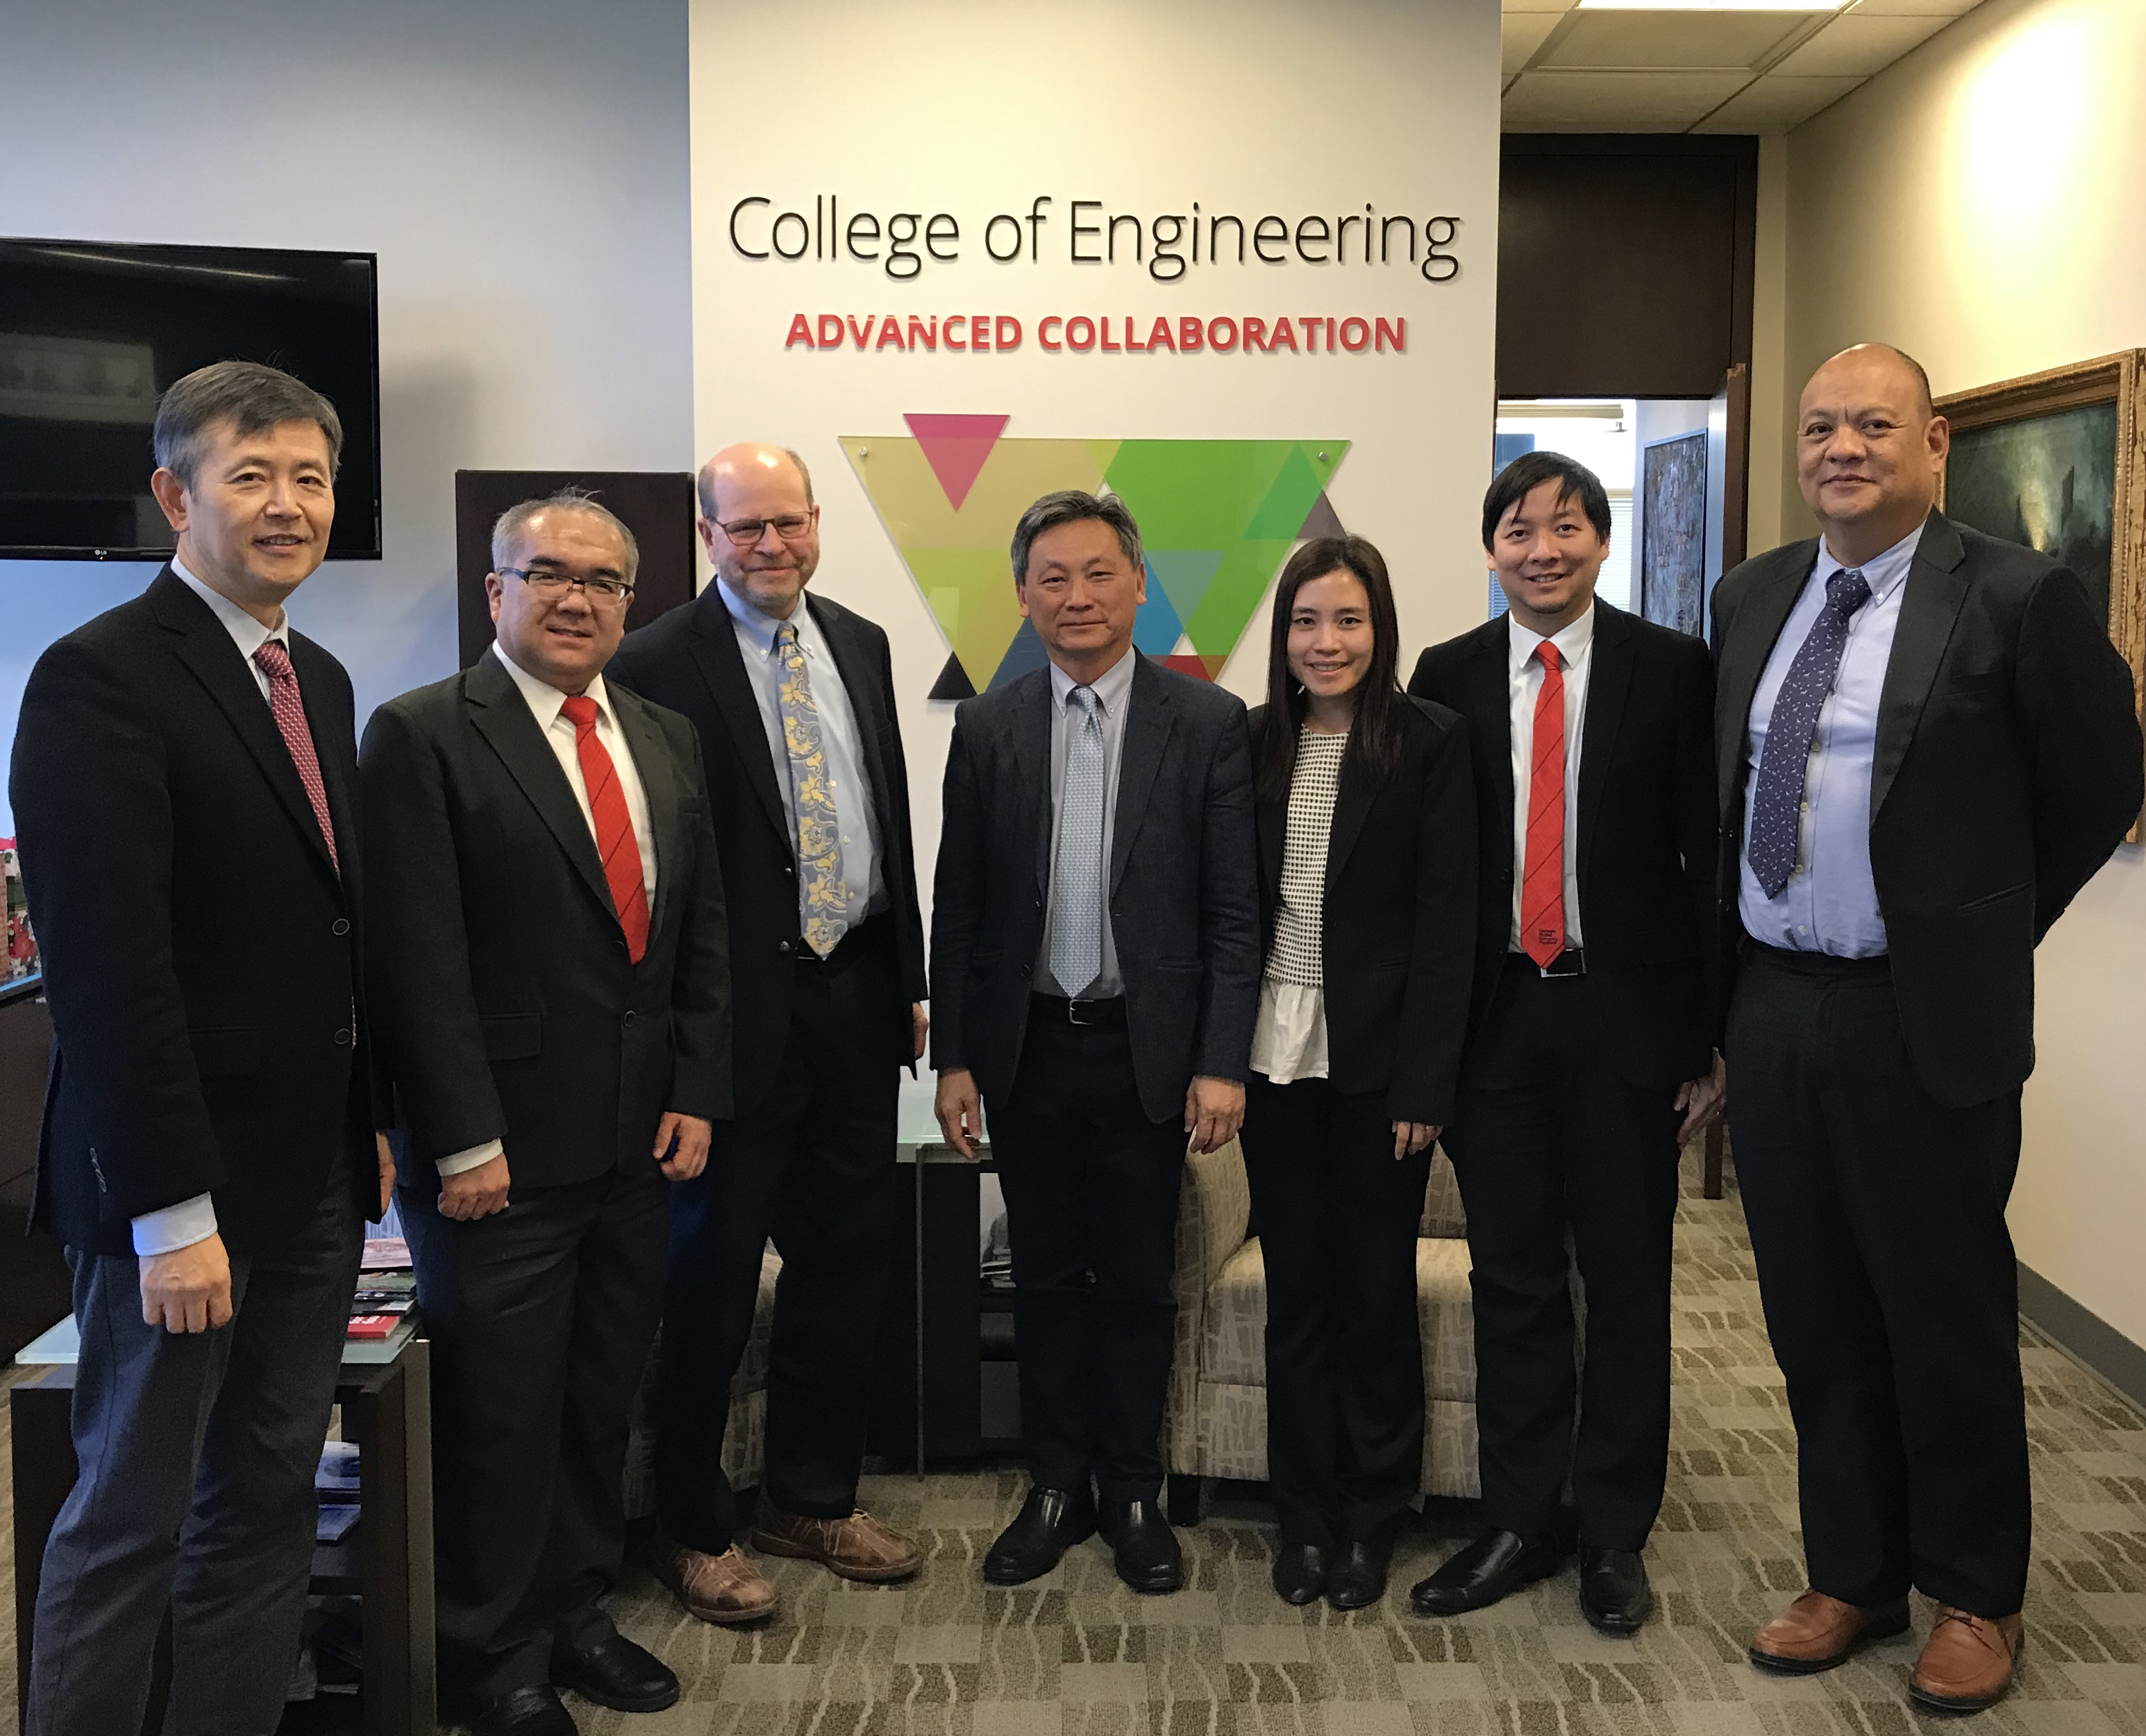 Thai partners who visited CMU